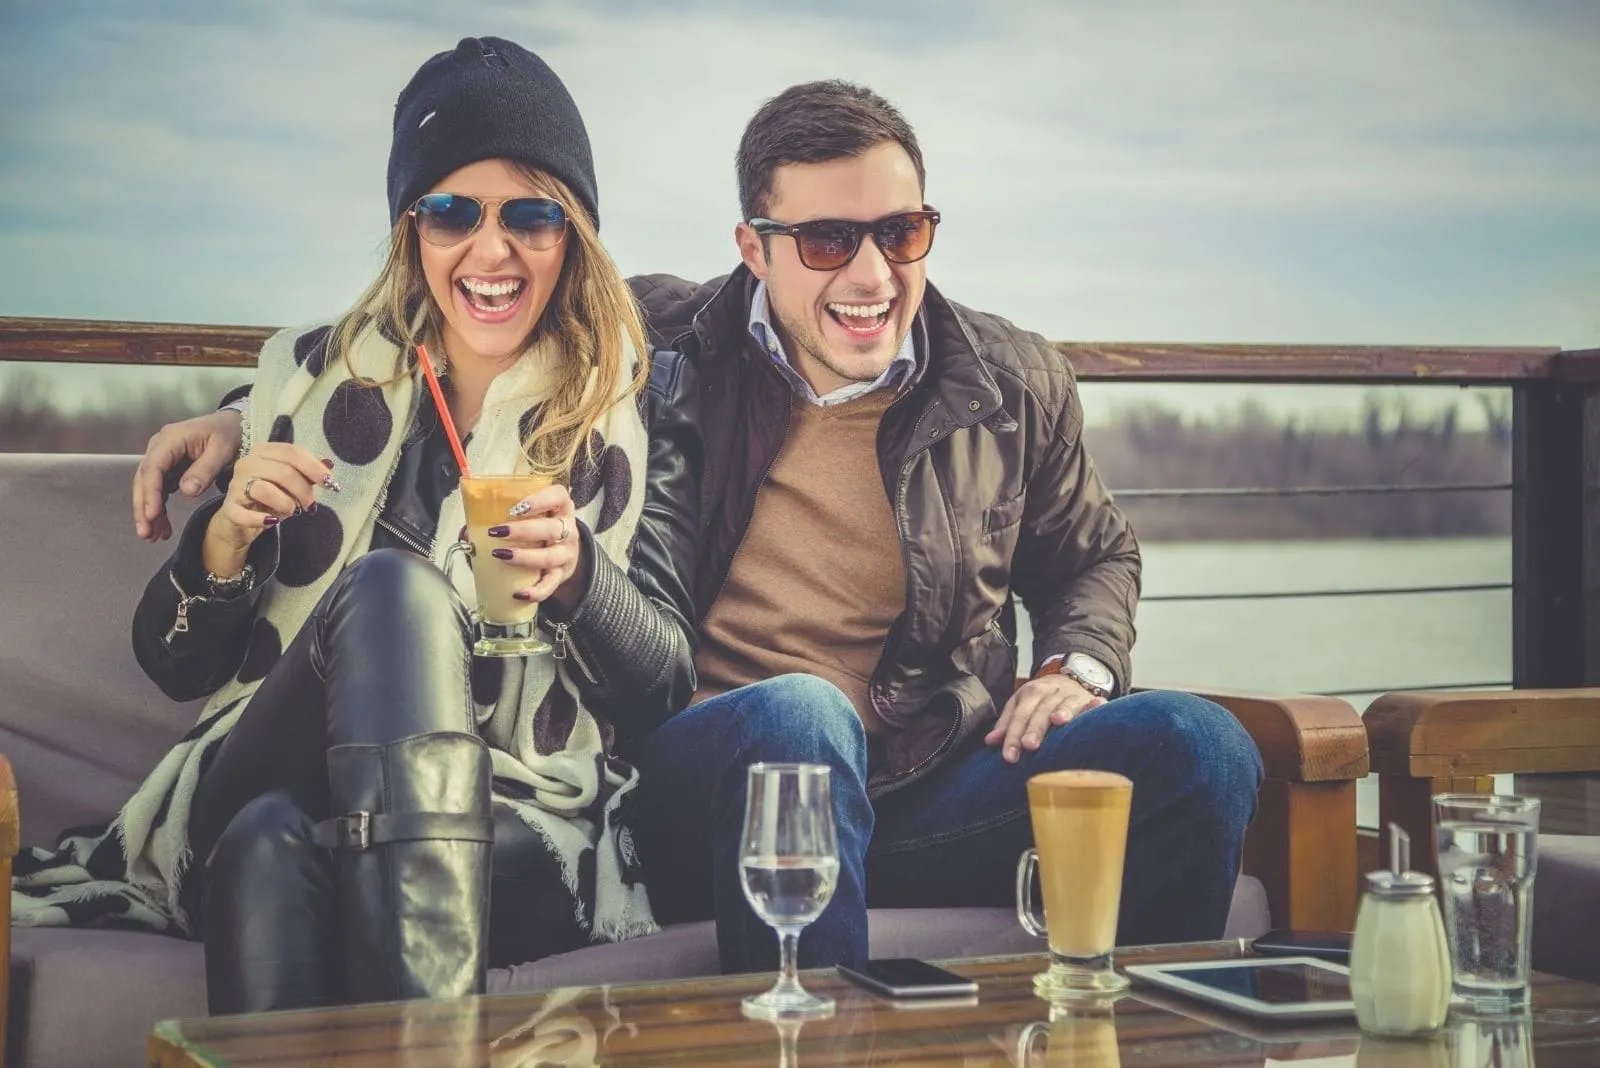 man and woman laughing wearing winter clothes sitting near the body of water and drinking beverage